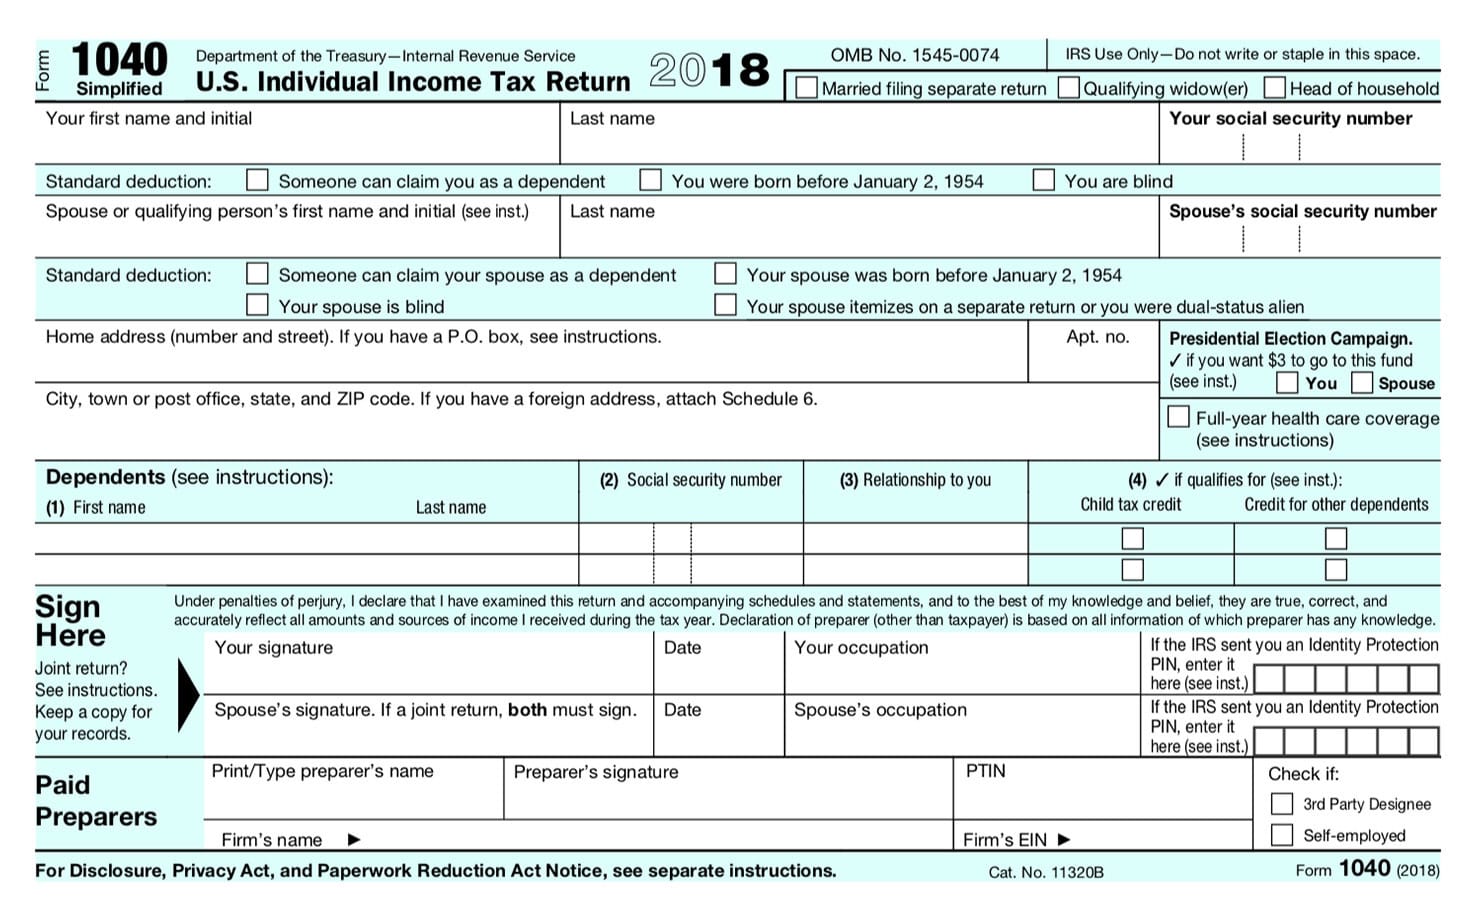 The new IRS tax forms are out: Here's what you should know